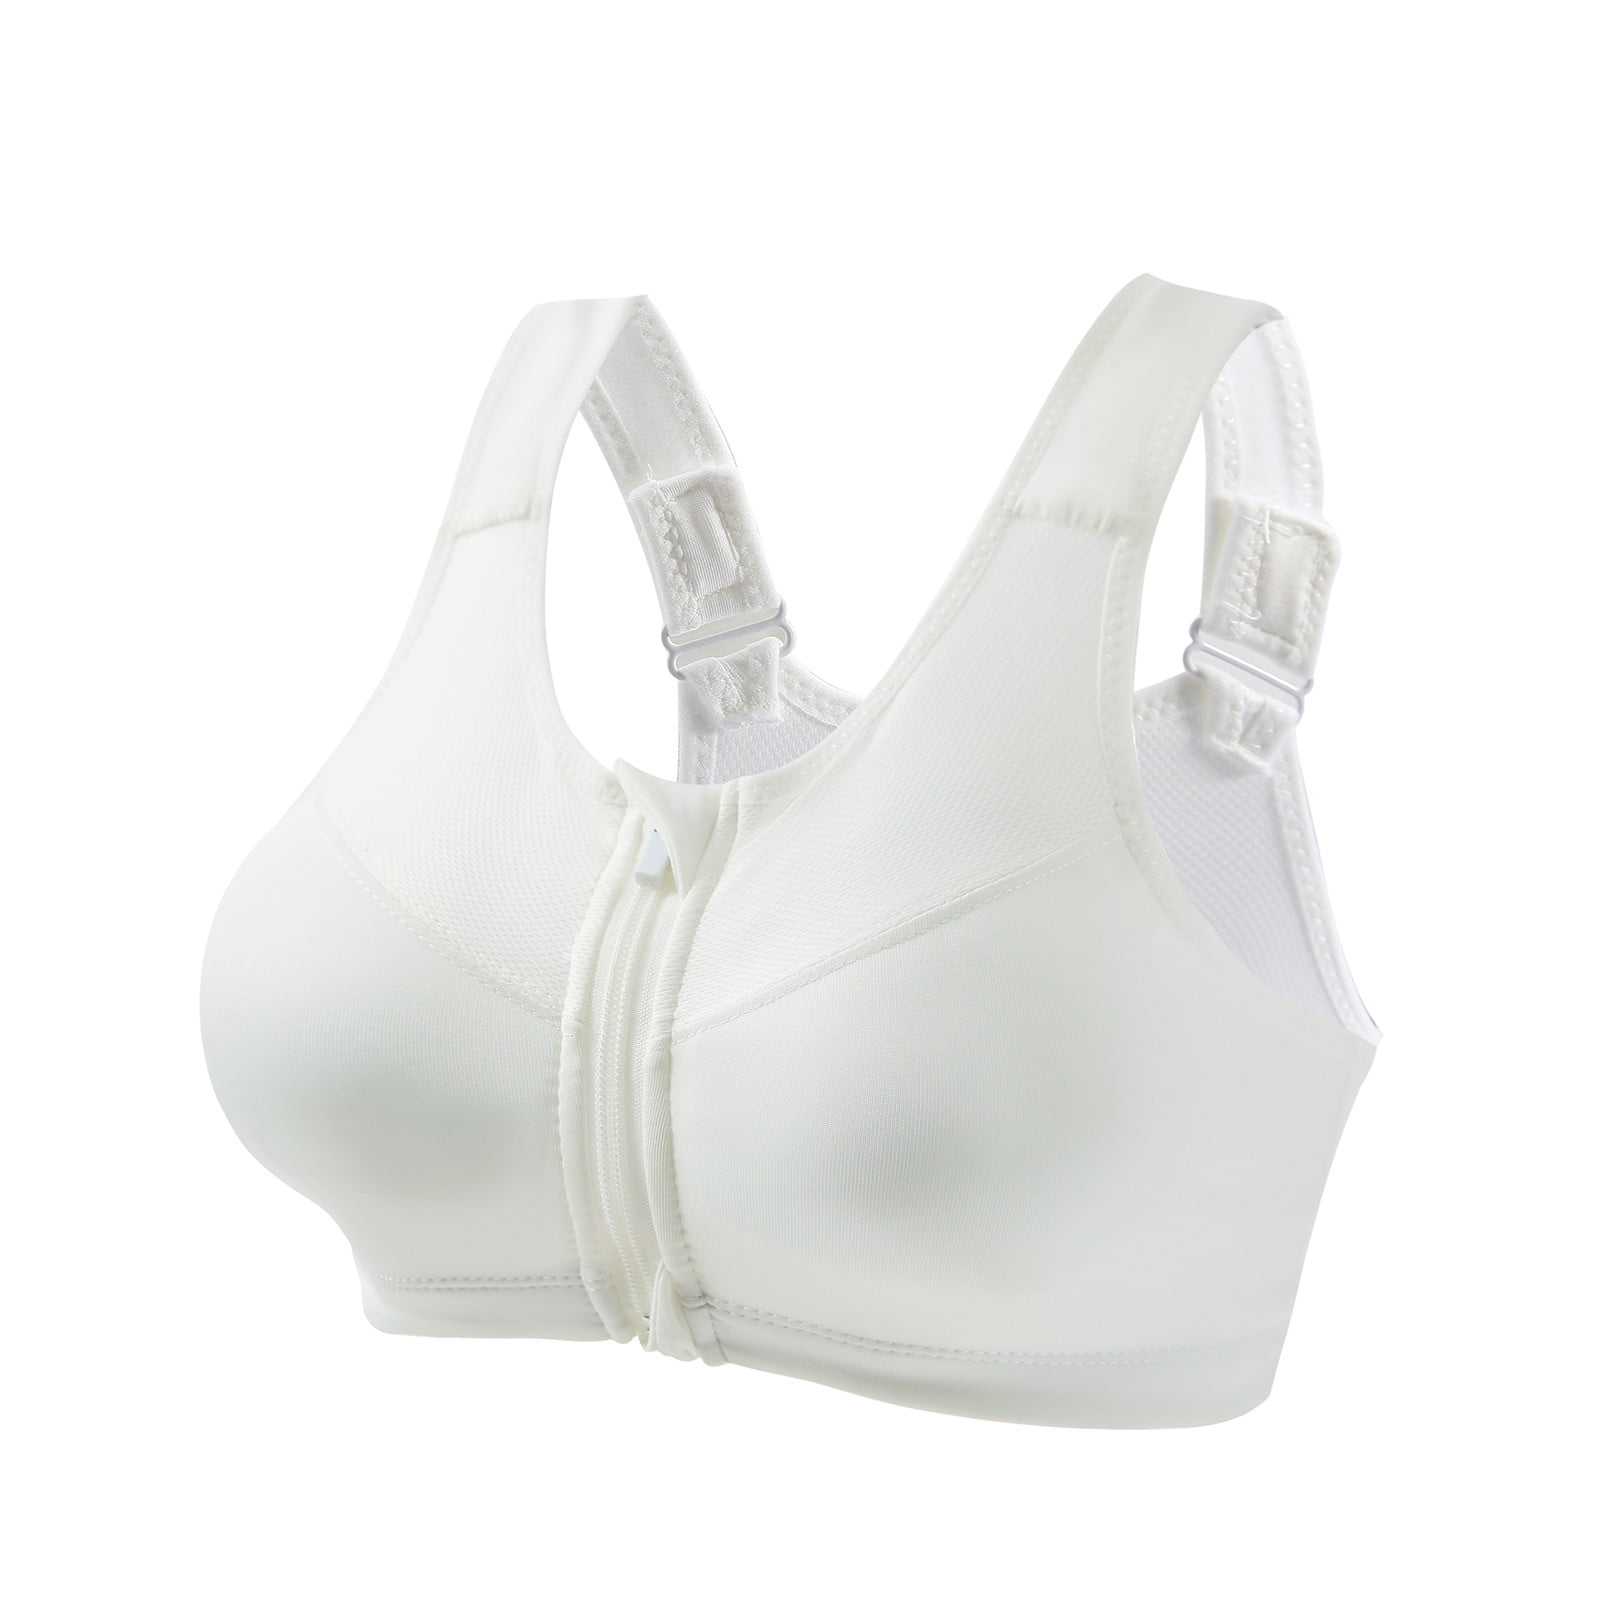 Bigersell Comfortable Sports Bras for Women Clearance Cute Bras